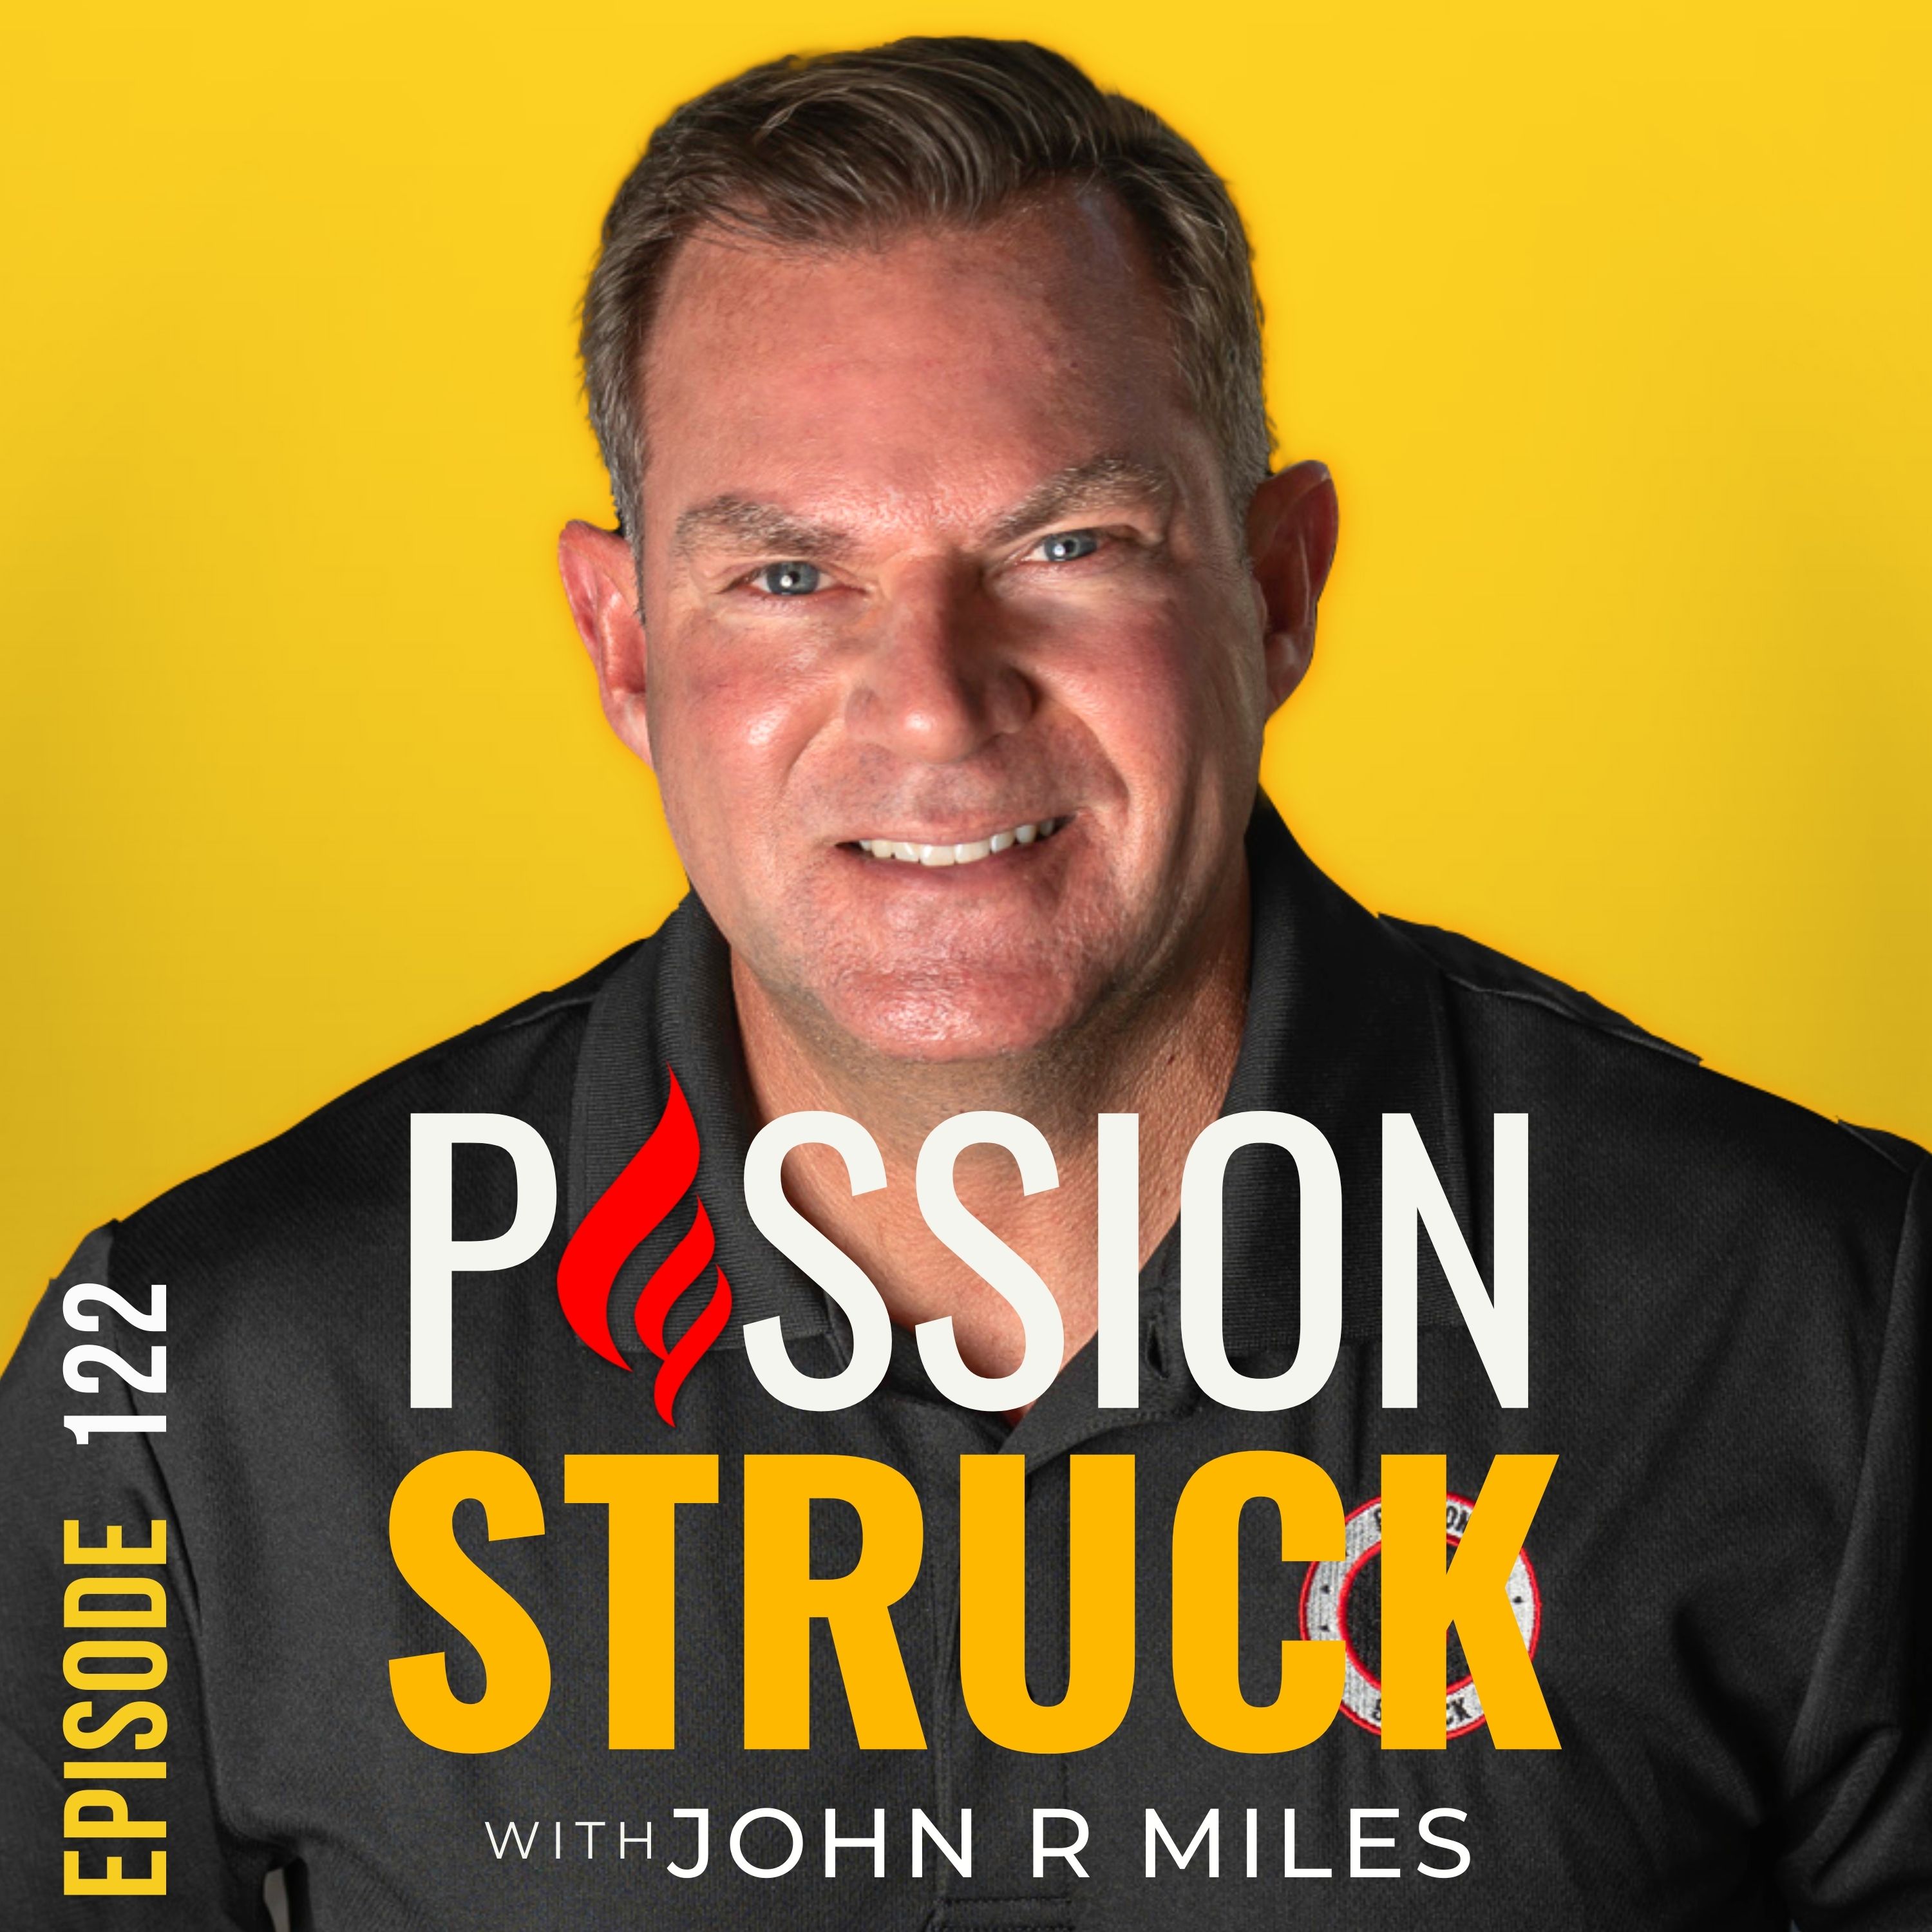 Passion Struck with John R. Miles album cover for episode 122 on the science of learning